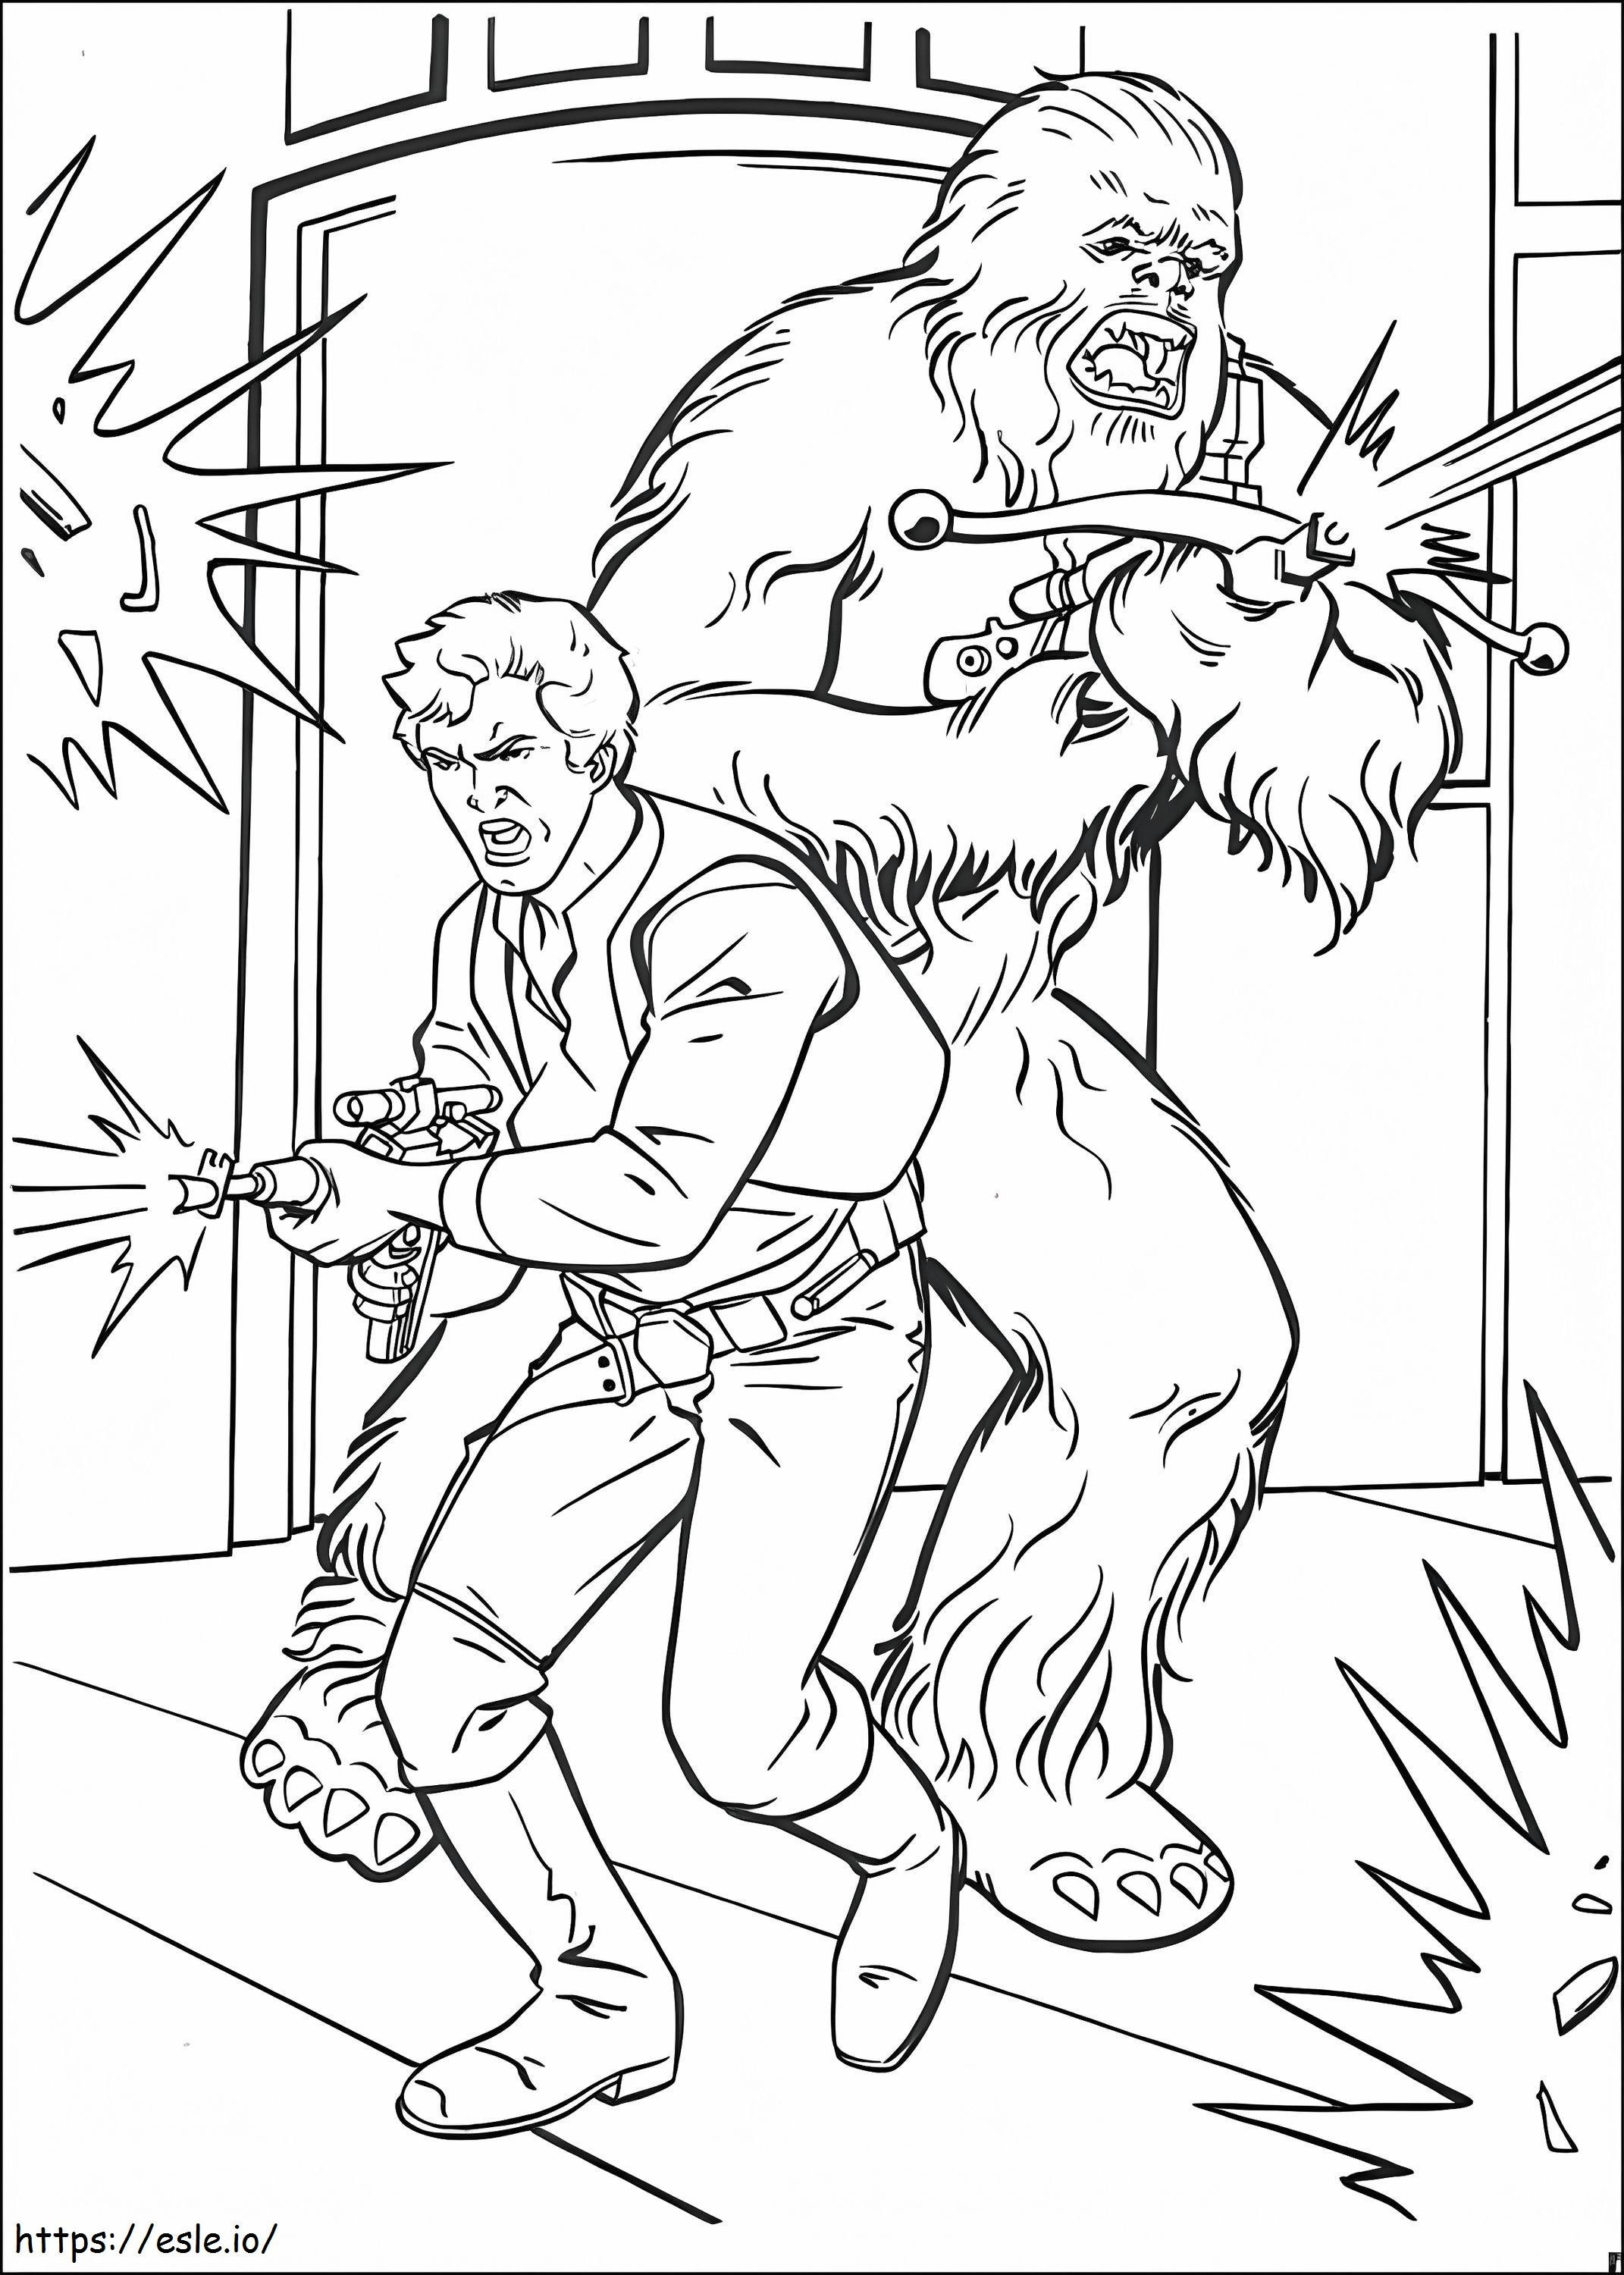 Chewbacca And Han Solo coloring page